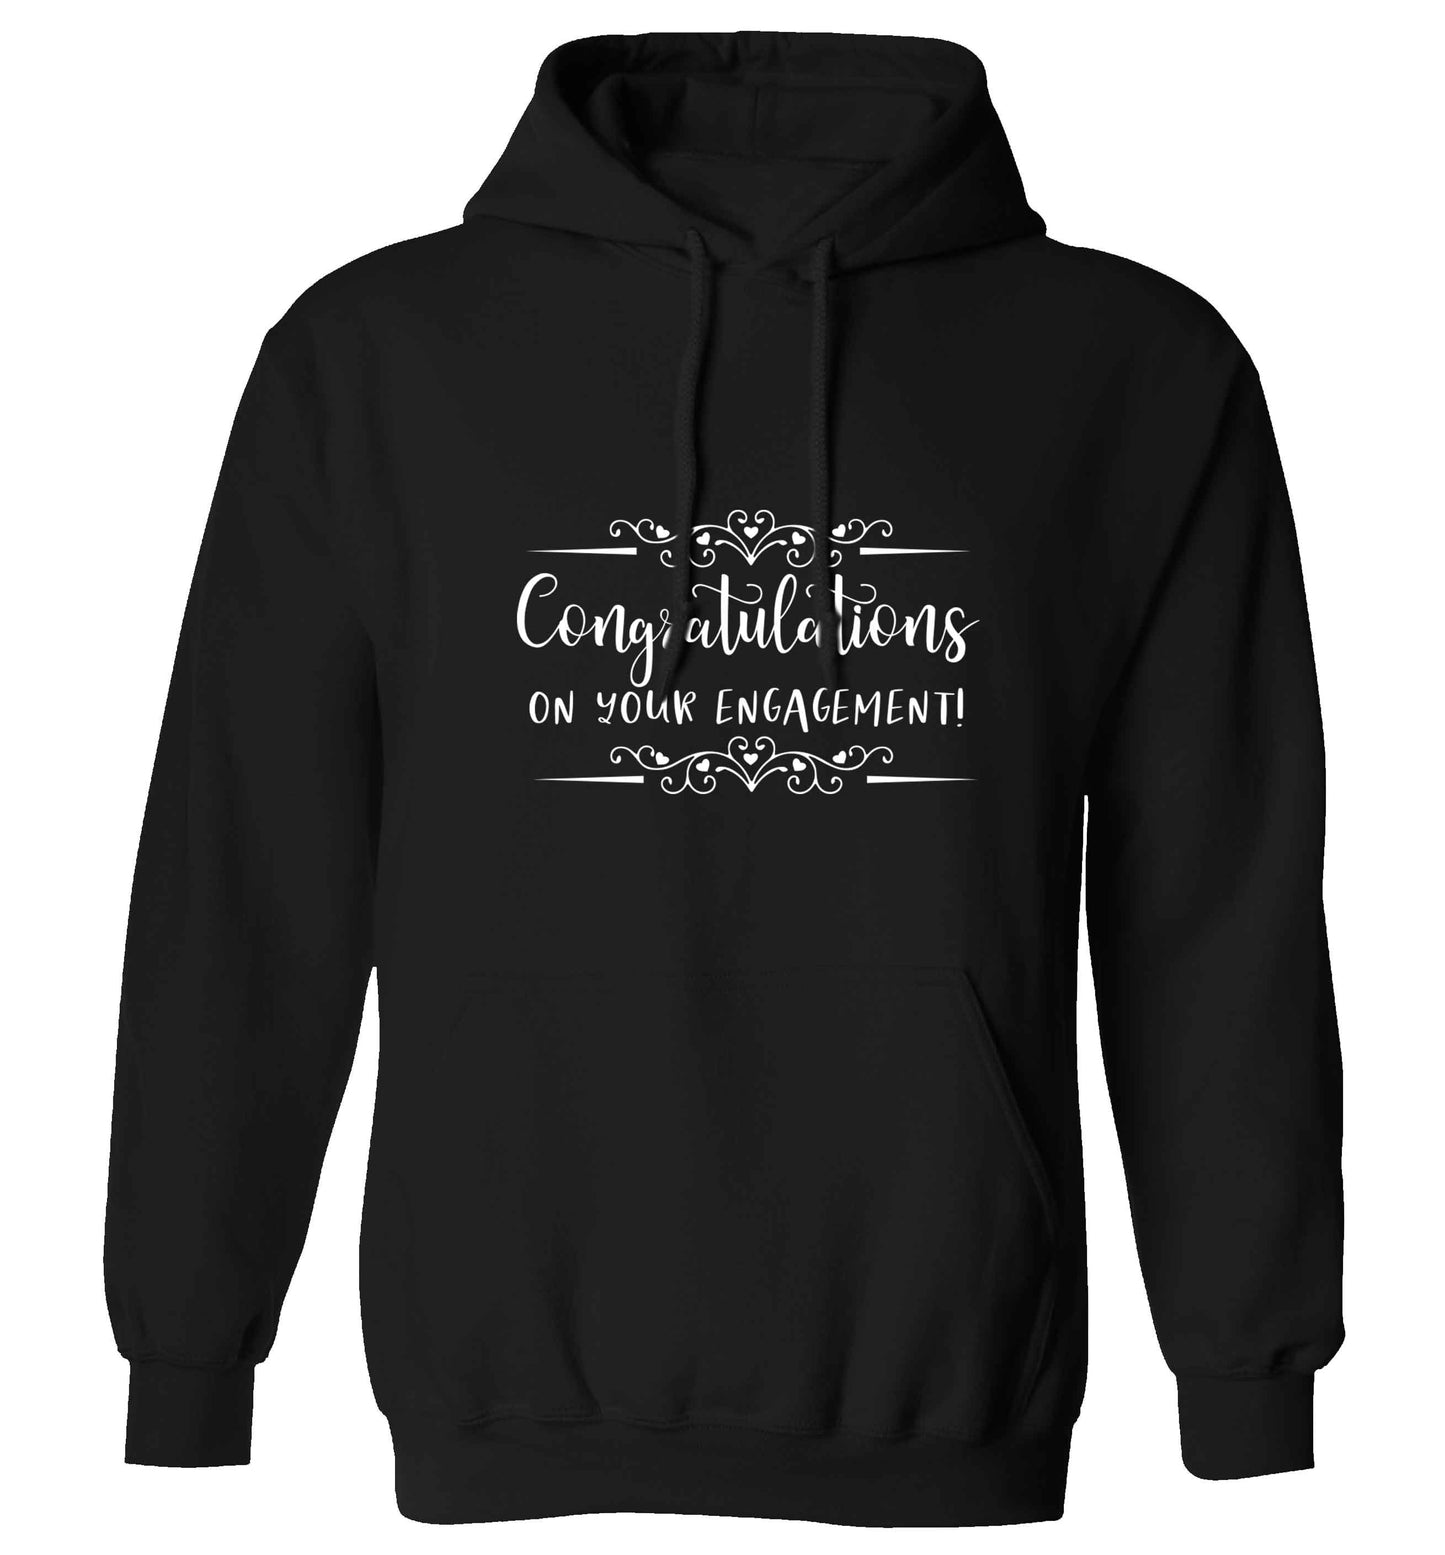 Congratulations on your engagement adults unisex black hoodie 2XL